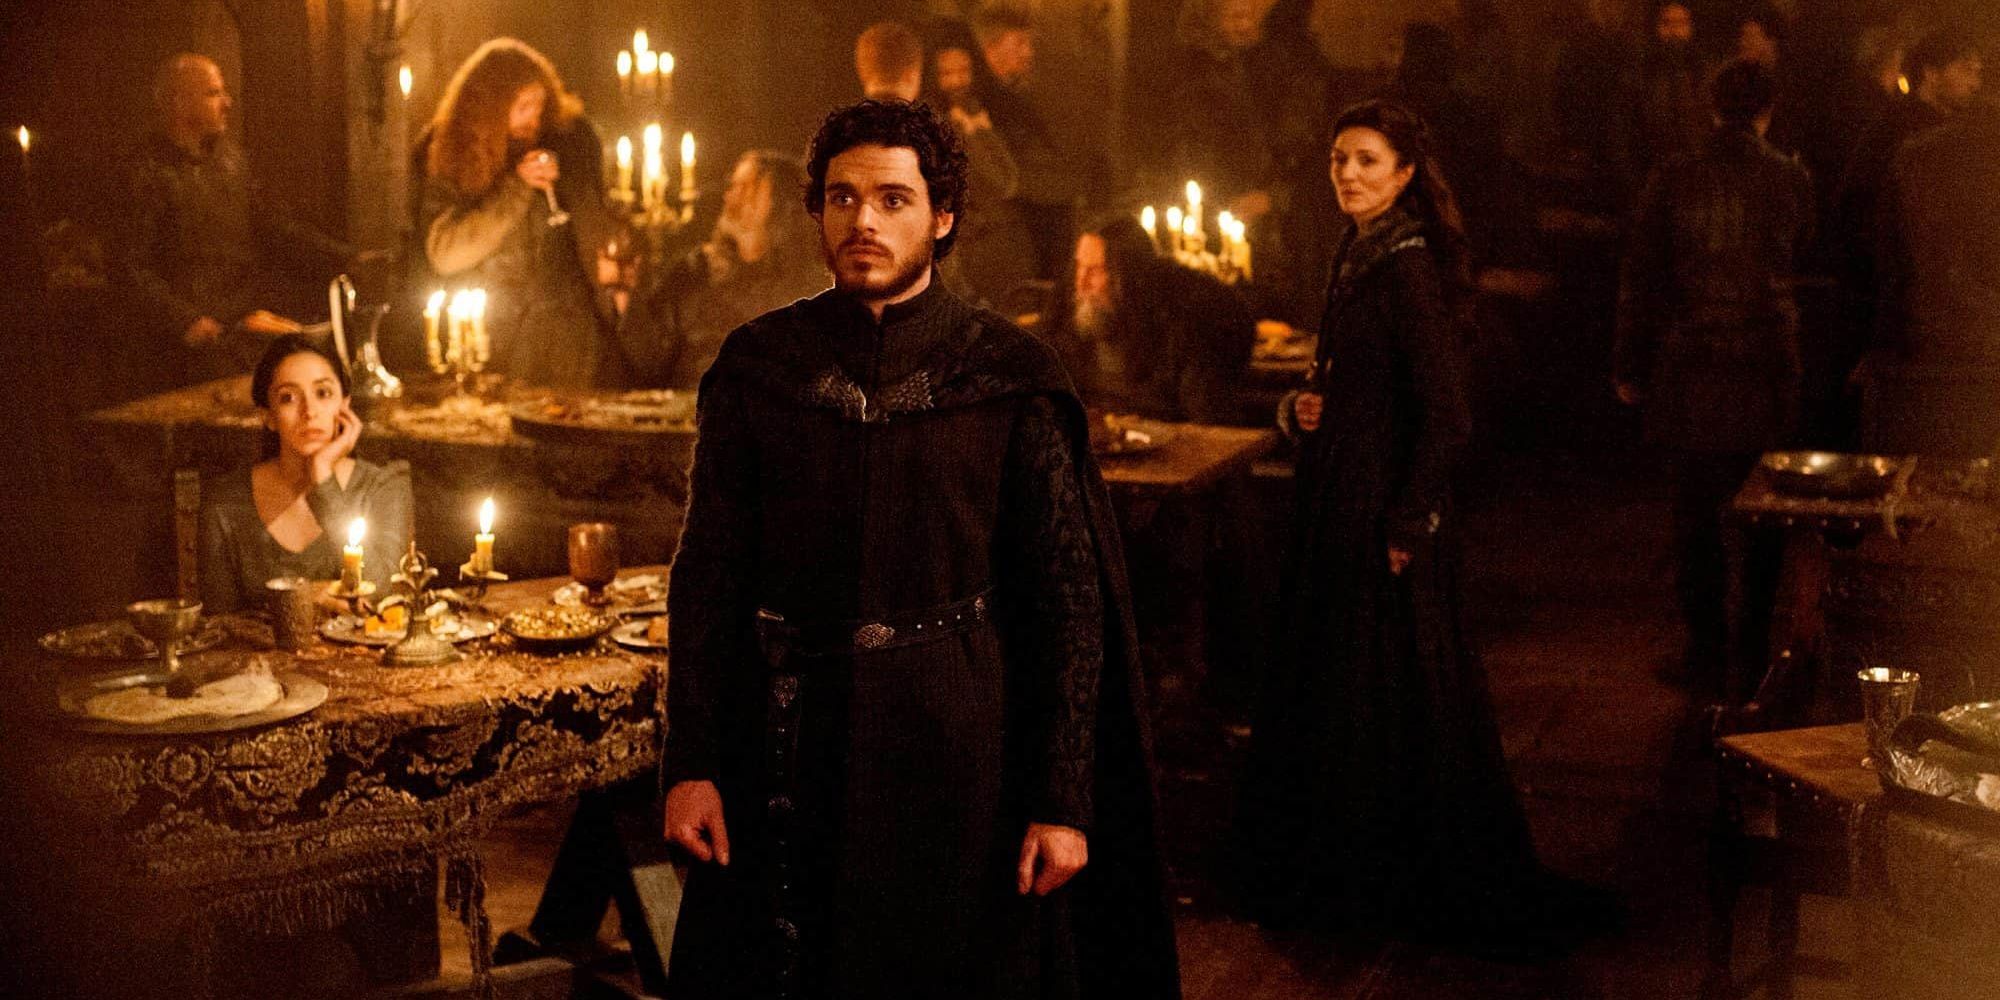 Robb Stark in the Red Wedding 1